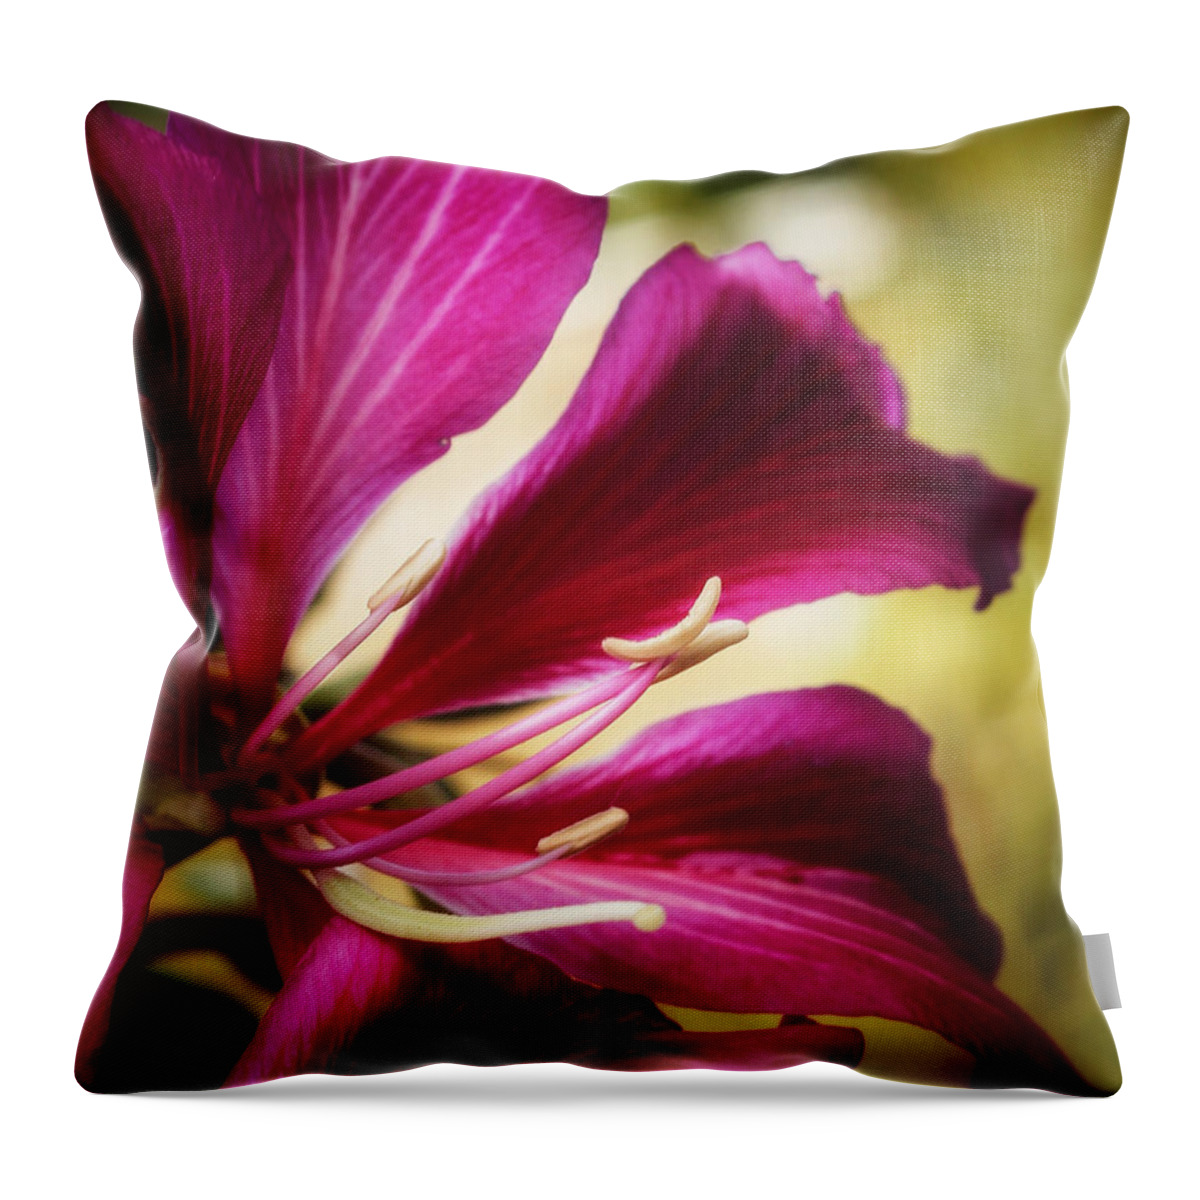 Florida Throw Pillow featuring the photograph Hong Kong Orchid by Brenda Wilcox aka Wildeyed n Wicked